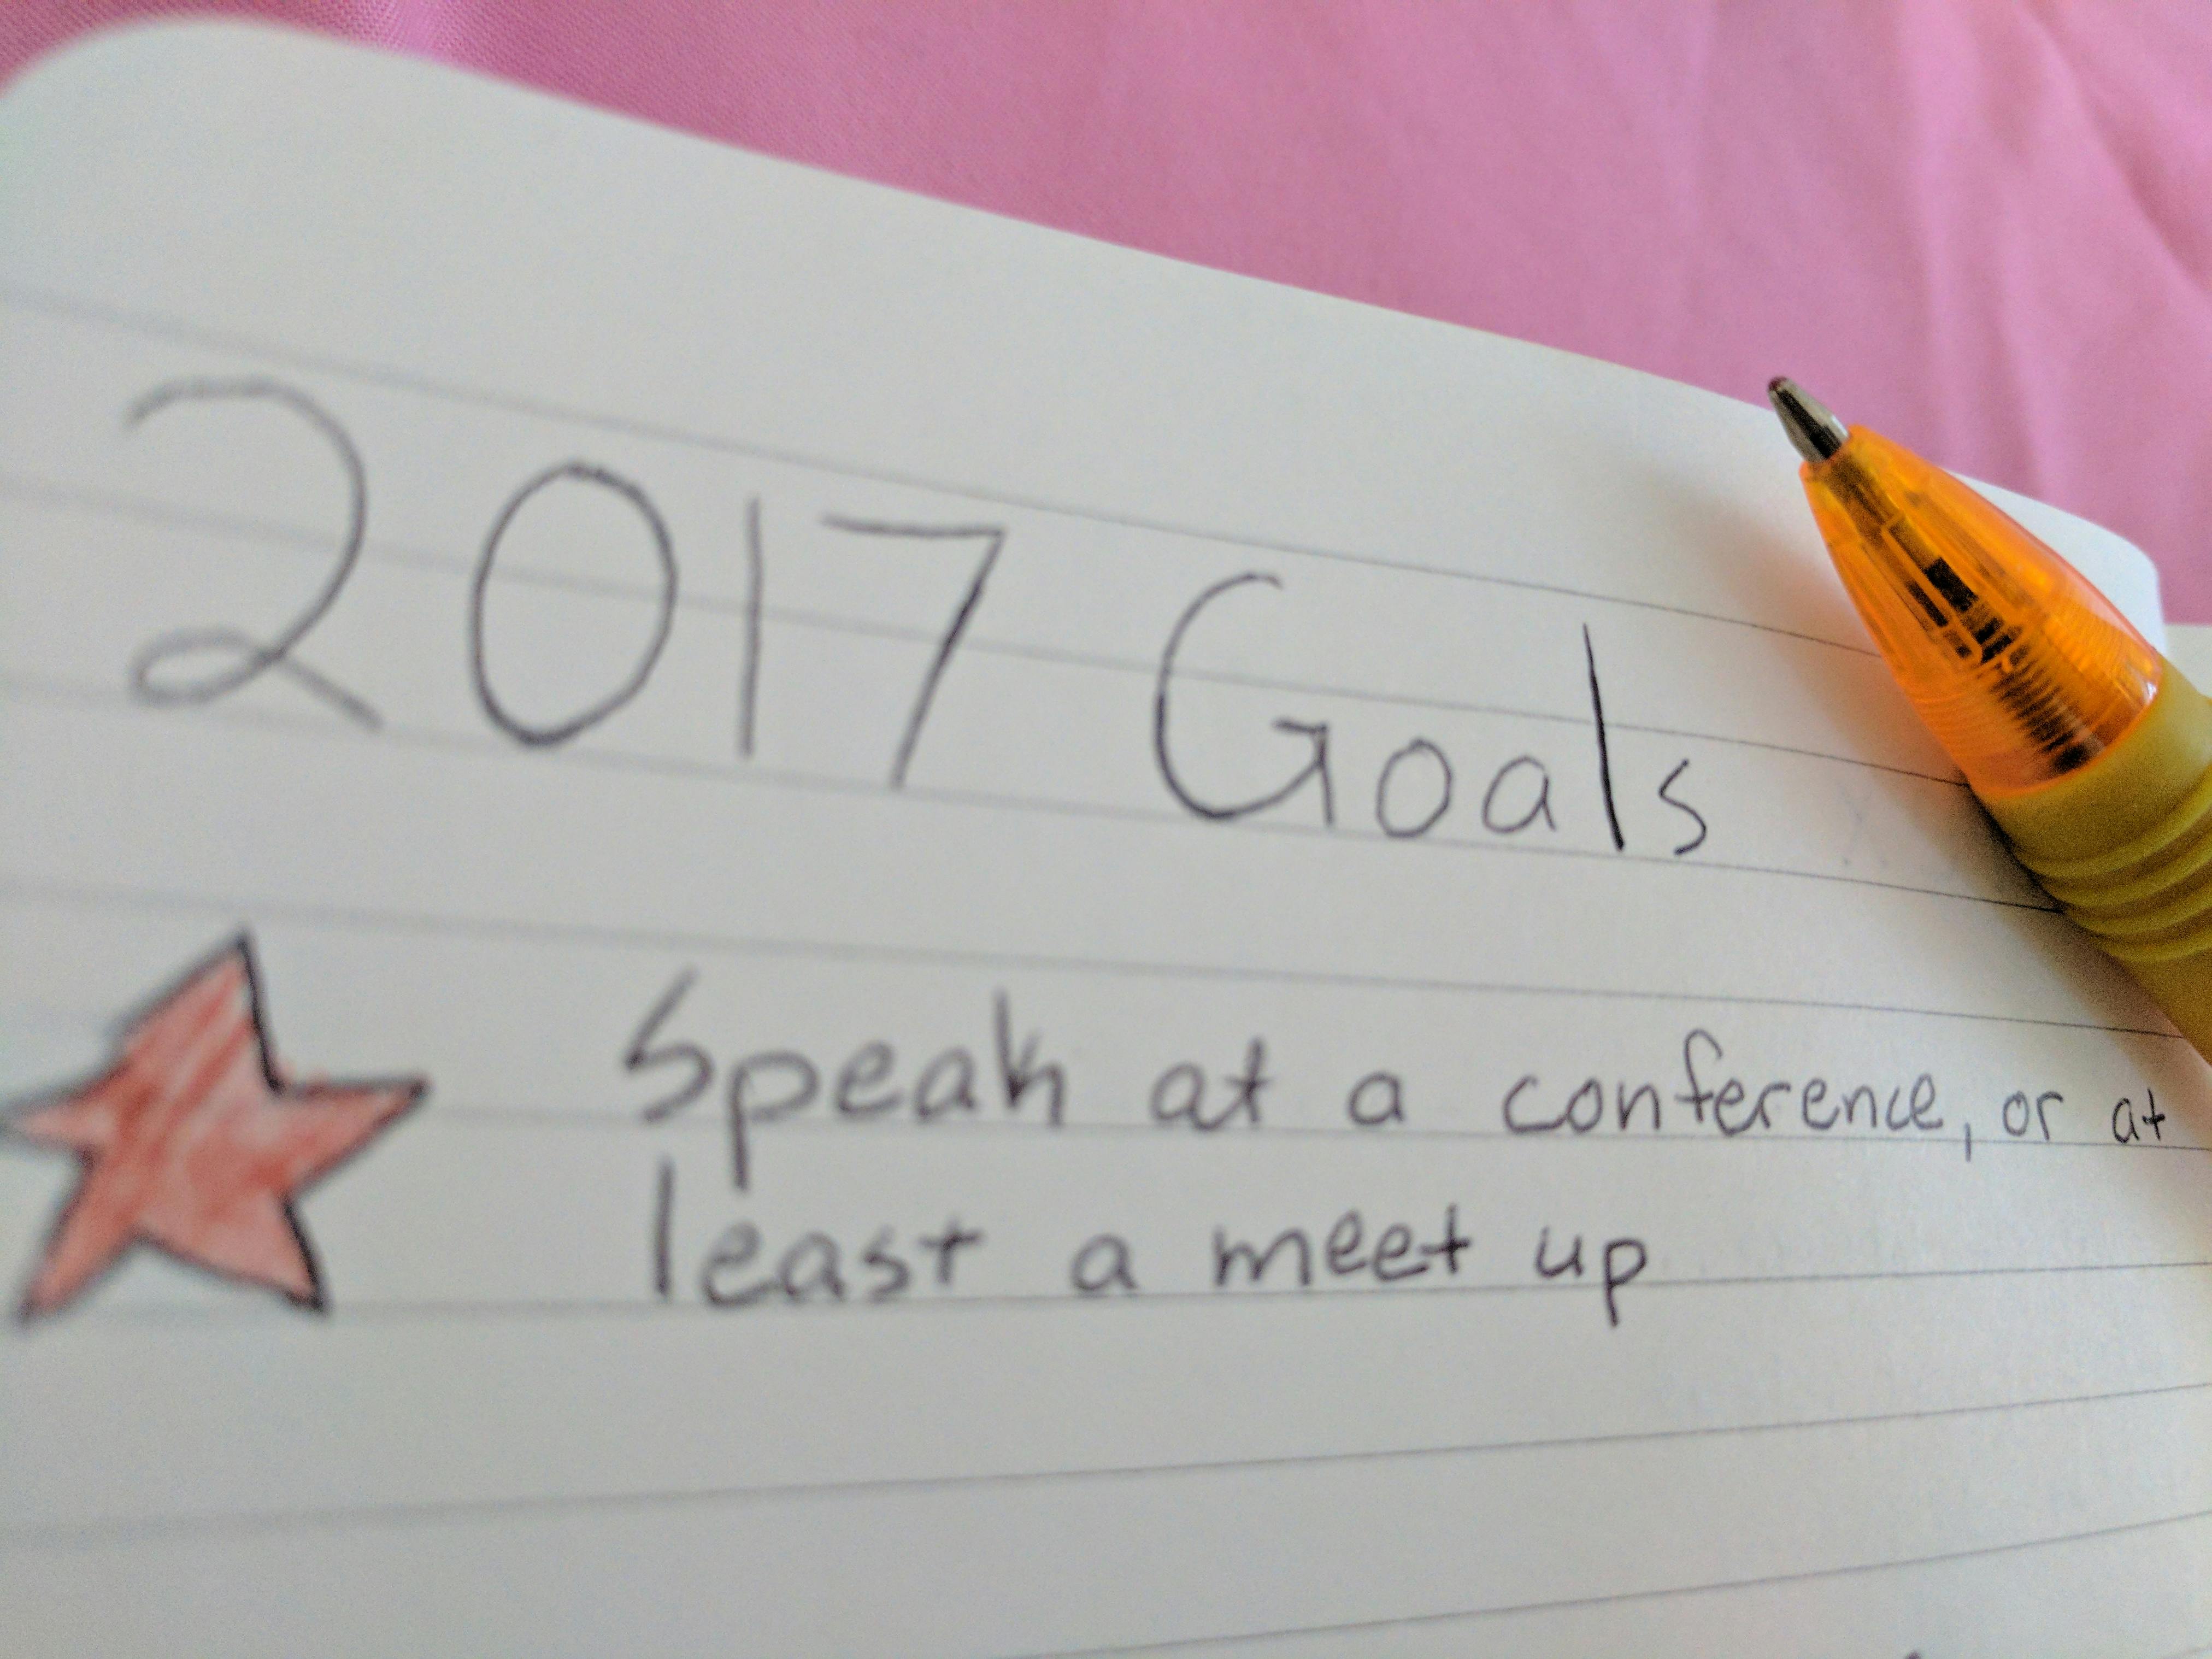 Collective Idea - 2017 Goals - Conference Speaking.jpg